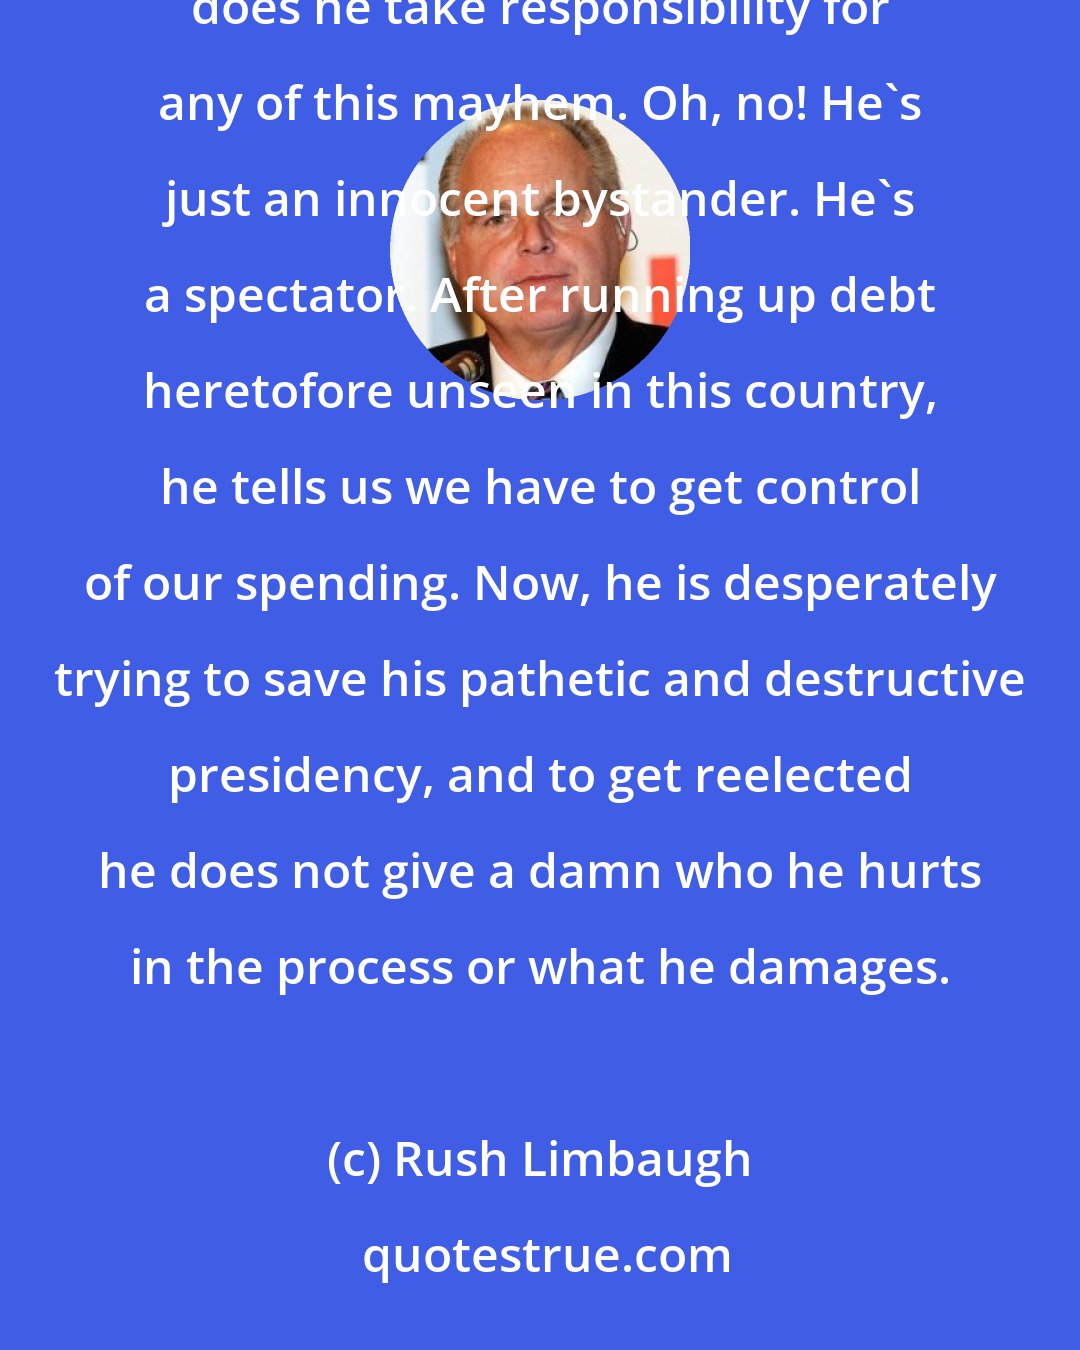 Rush Limbaugh: One day Barack Obama targets one group or business, the next day he targets another. Never, ever does he take responsibility for any of this mayhem. Oh, no! He's just an innocent bystander. He's a spectator. After running up debt heretofore unseen in this country, he tells us we have to get control of our spending. Now, he is desperately trying to save his pathetic and destructive presidency, and to get reelected he does not give a damn who he hurts in the process or what he damages.